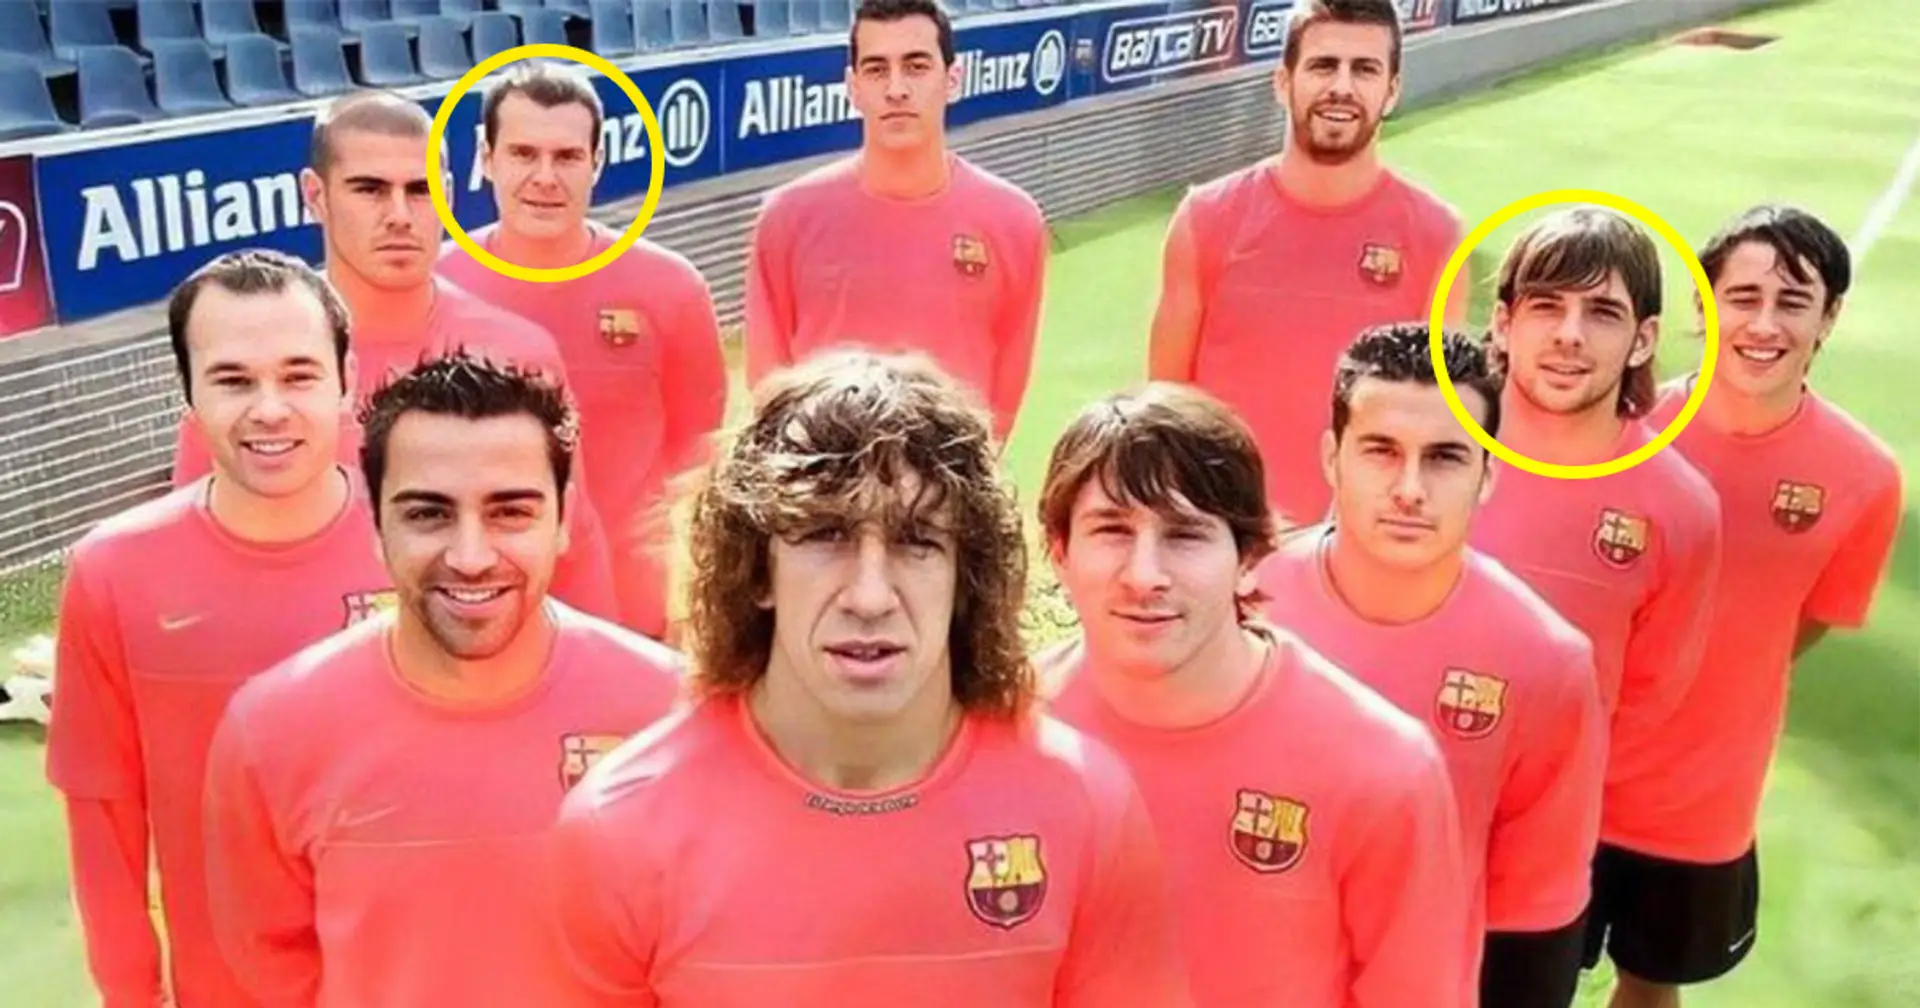 Who these two players from legendary Barca pic are and where they are now